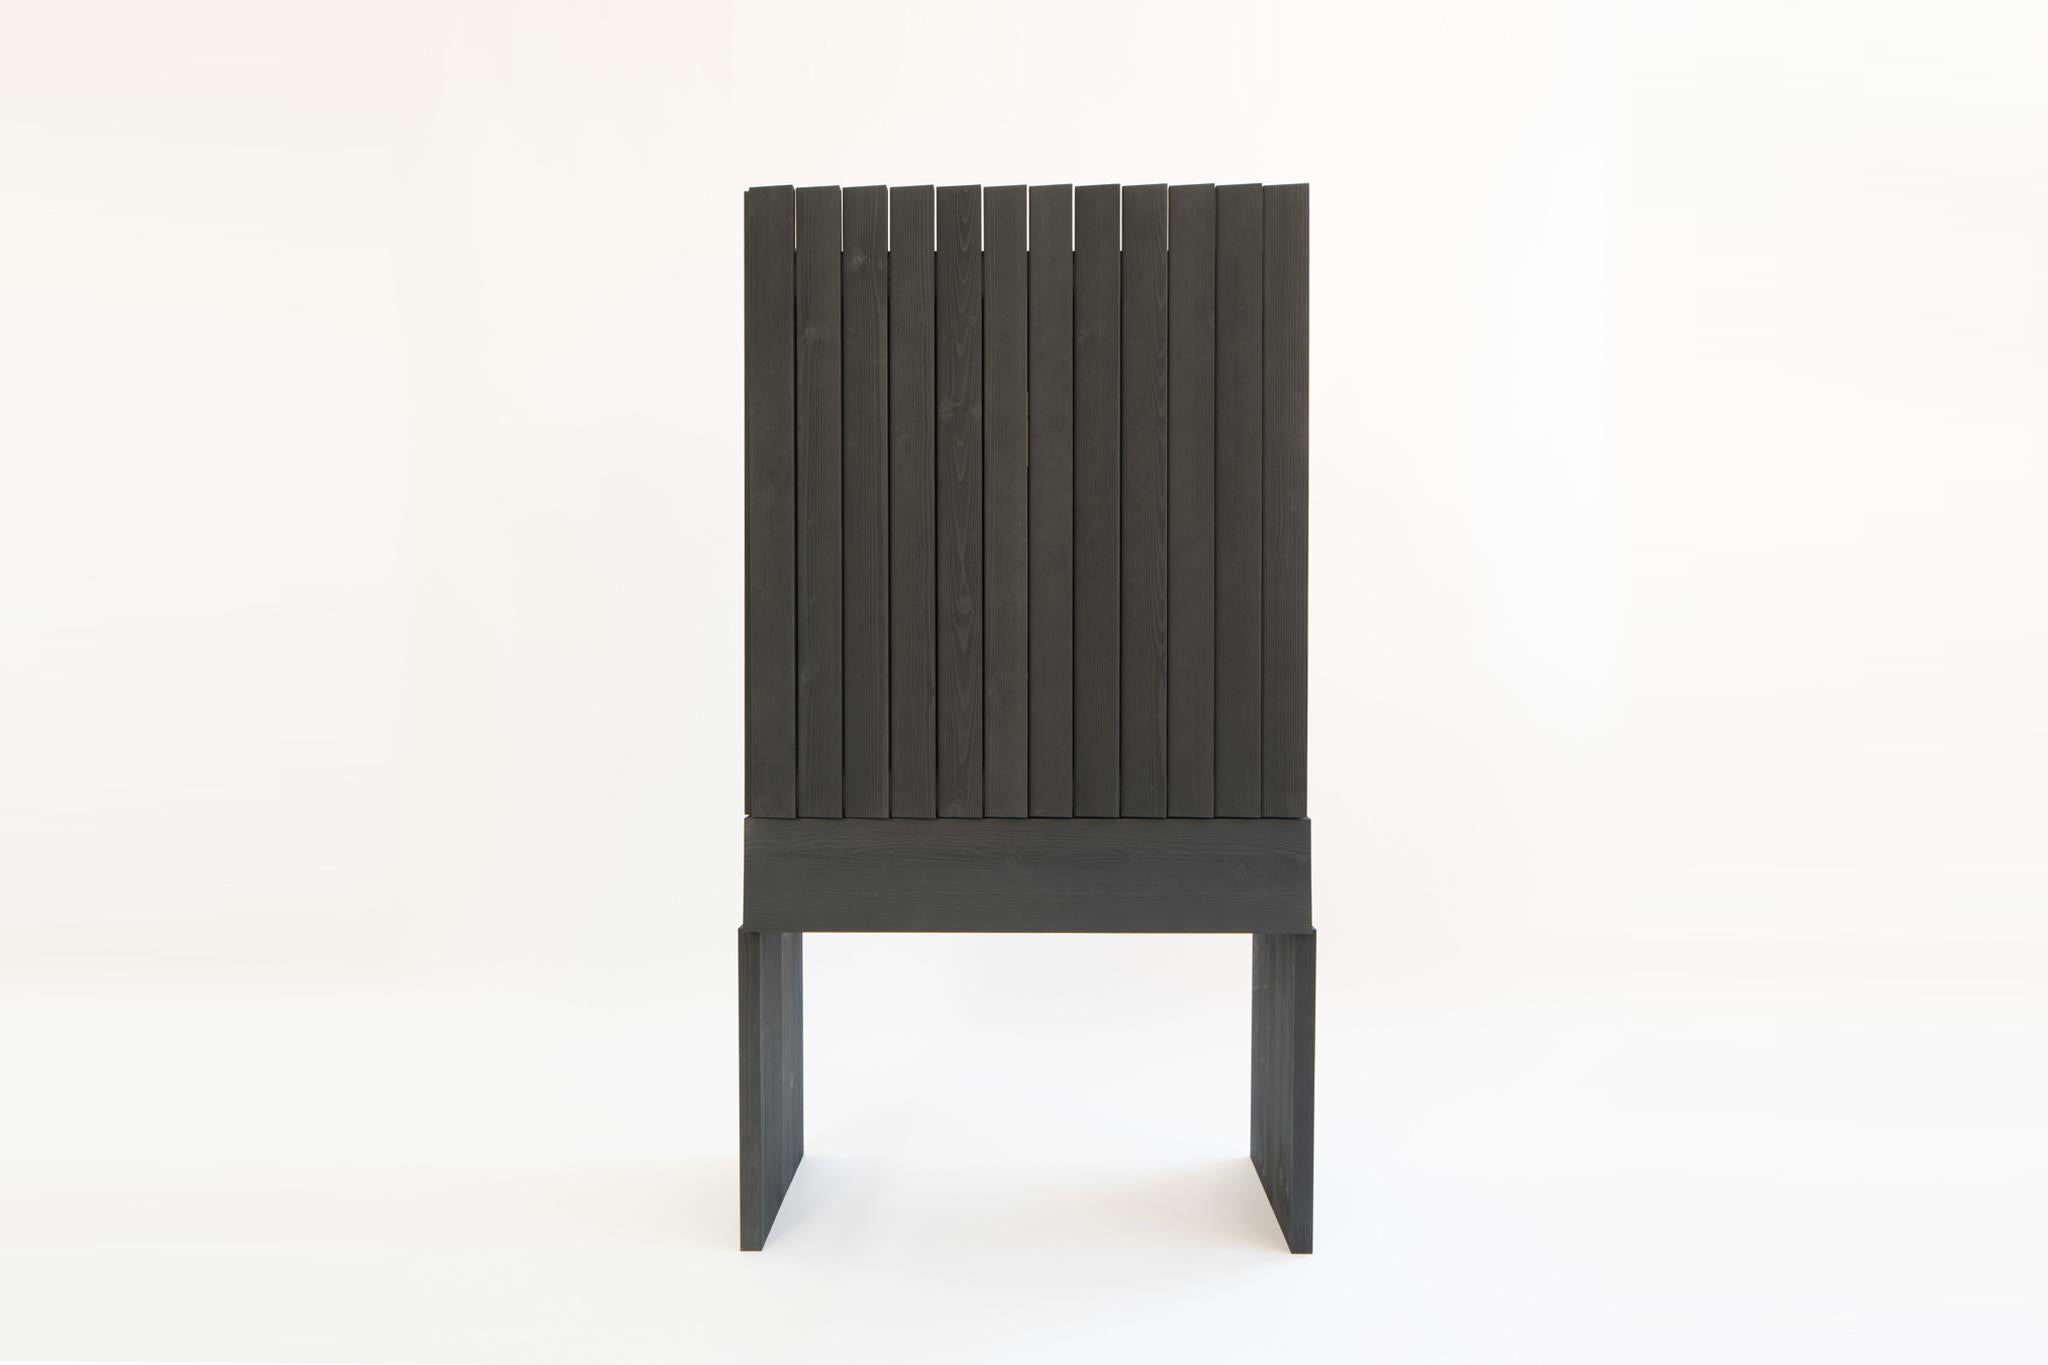 Ritual cabinet by Jude Heslin Di Leo
Dimensions: W 102 x D 51 x H 183 cm
Materials: Ink dyed Hemlock, Blackened Steel & Bronze Mirror

Ritual Cabinet is an exploration in contrast. Utilizing humble materials and high aesthetics it presents a